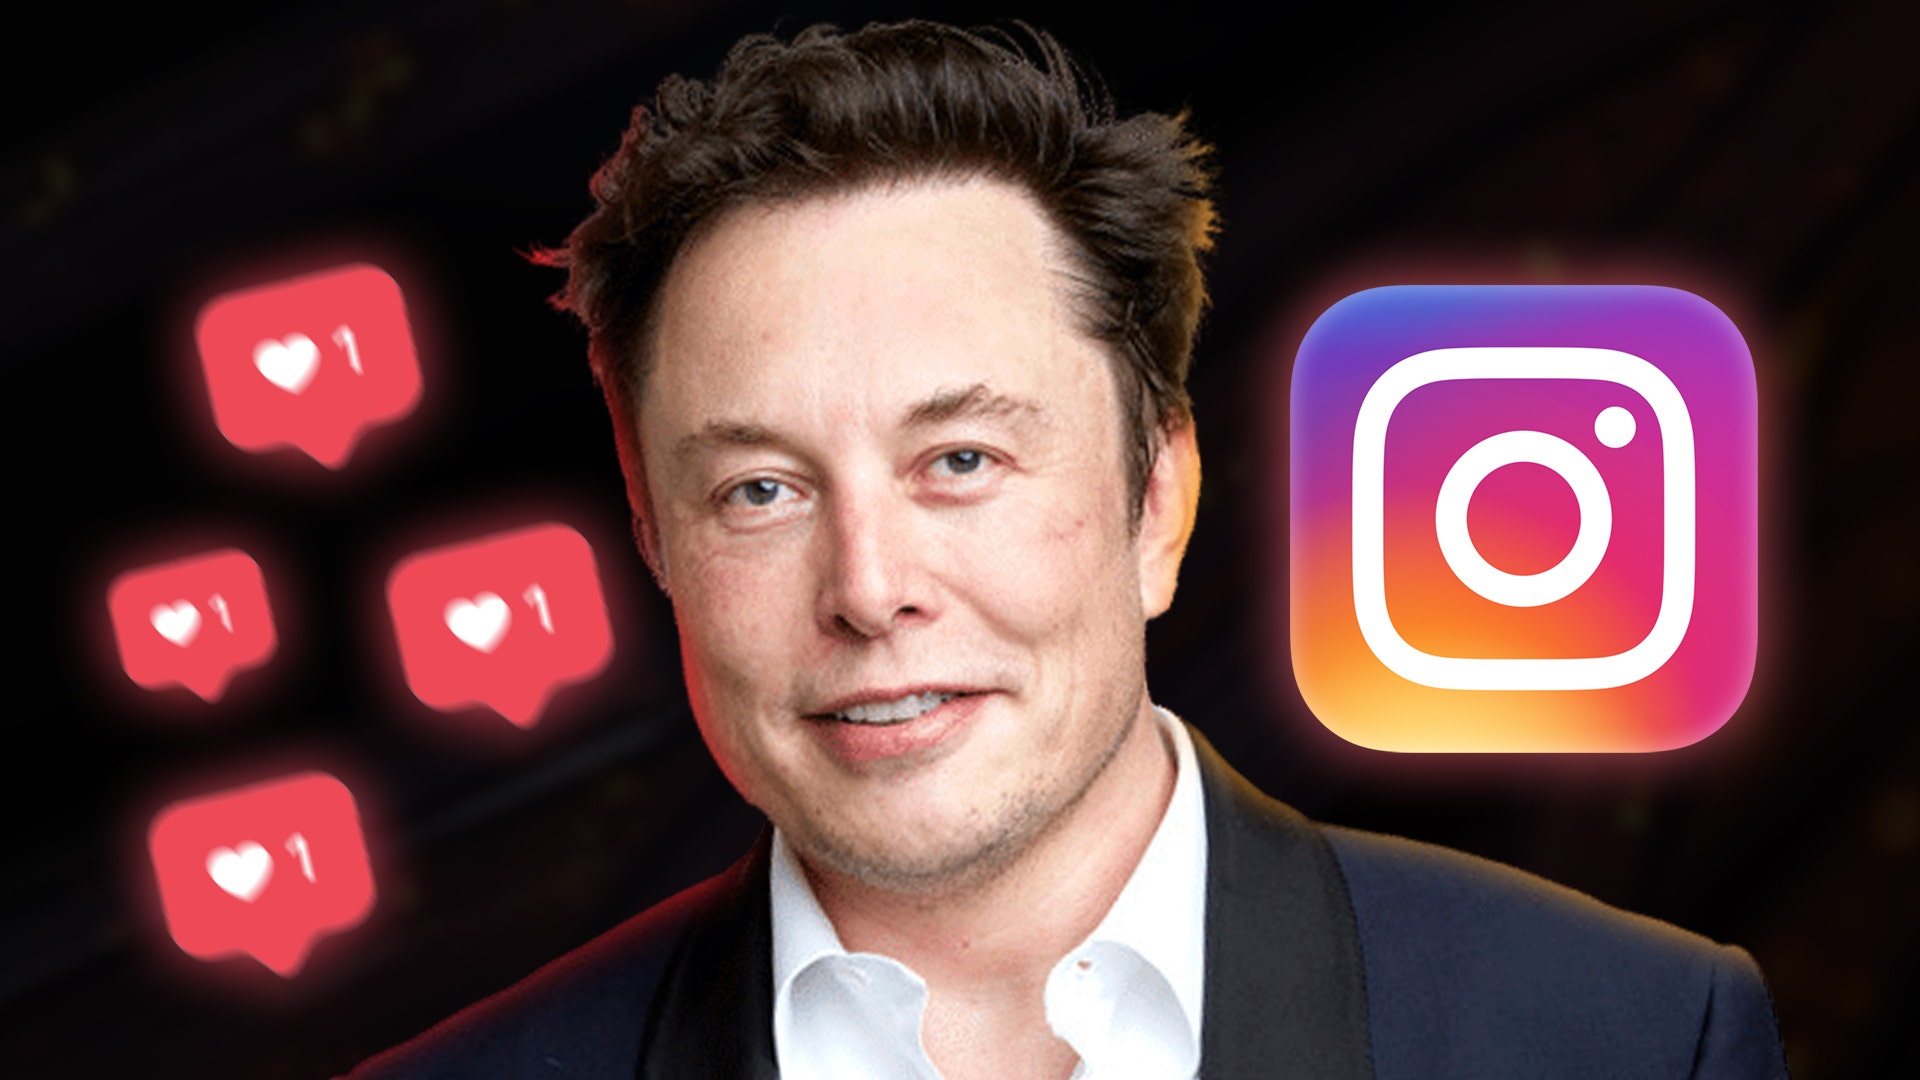 'Instagram Makes People Depressed': Elon Musk Doubles Down On Criticism Of Non-Twitter Social Media Platforms